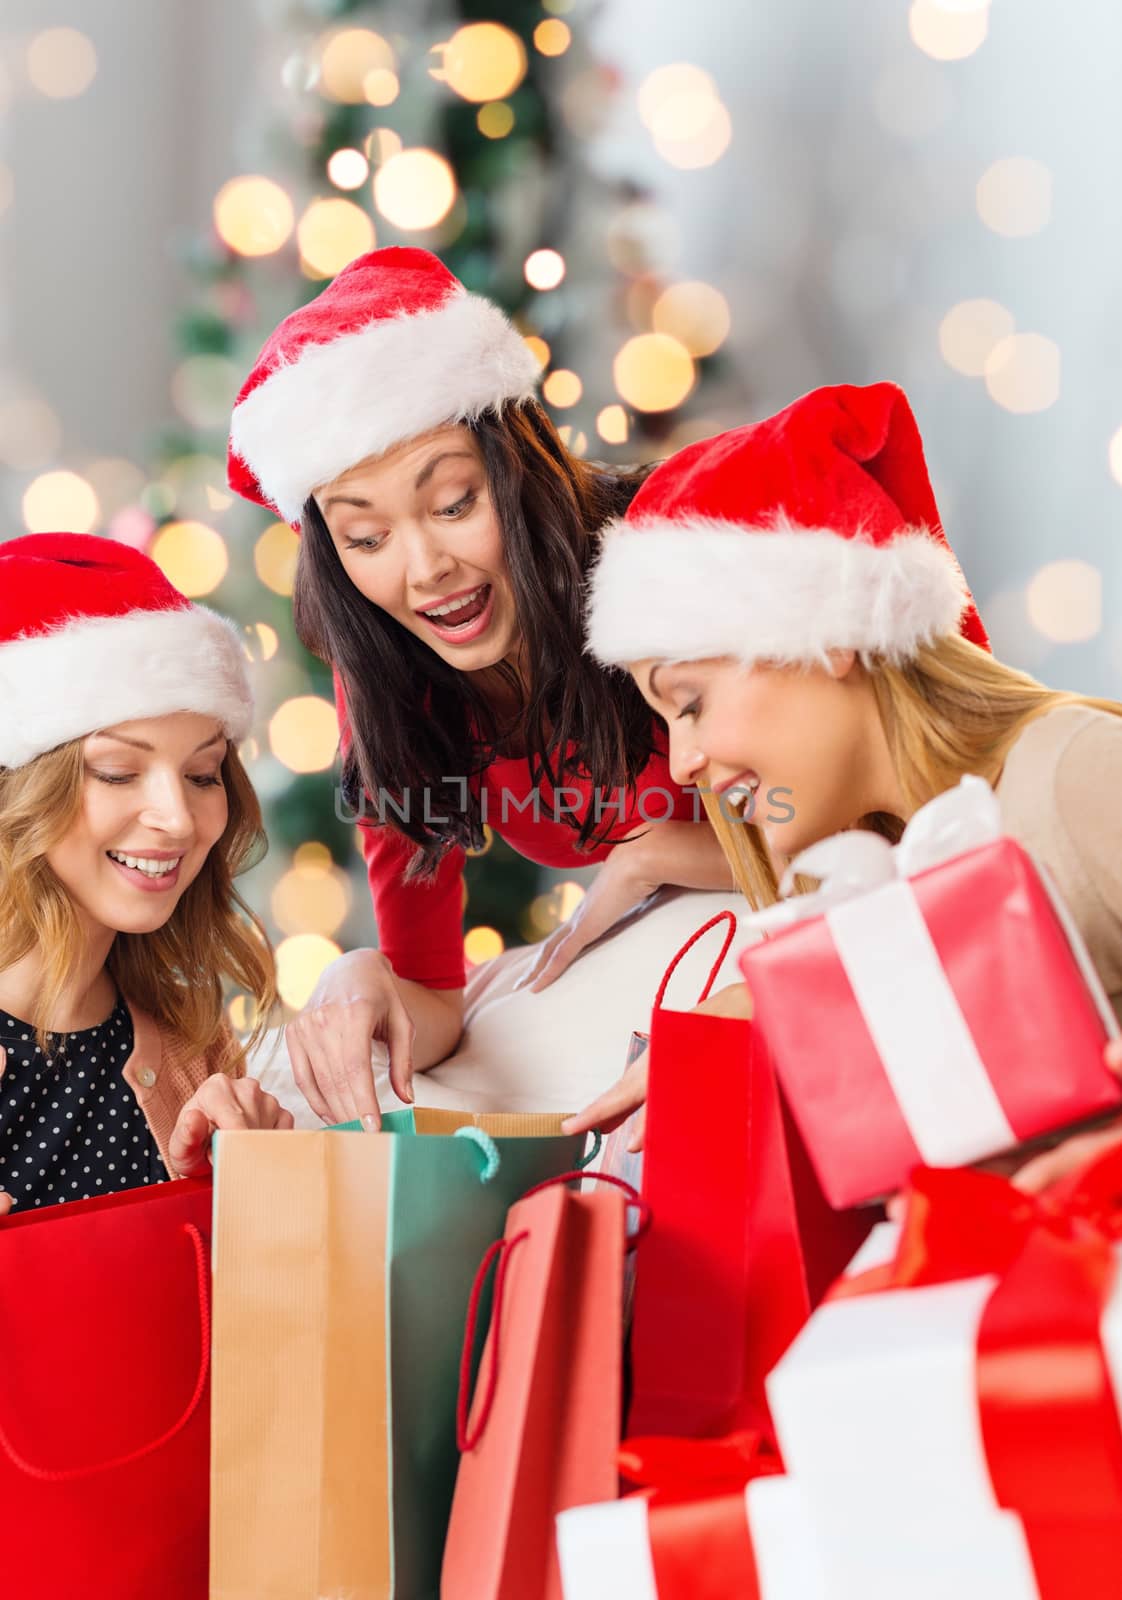 sale, winter holidays and people concept - smiling young woman in santa helper hat with gifts and shopping bags over christmas tree lights background